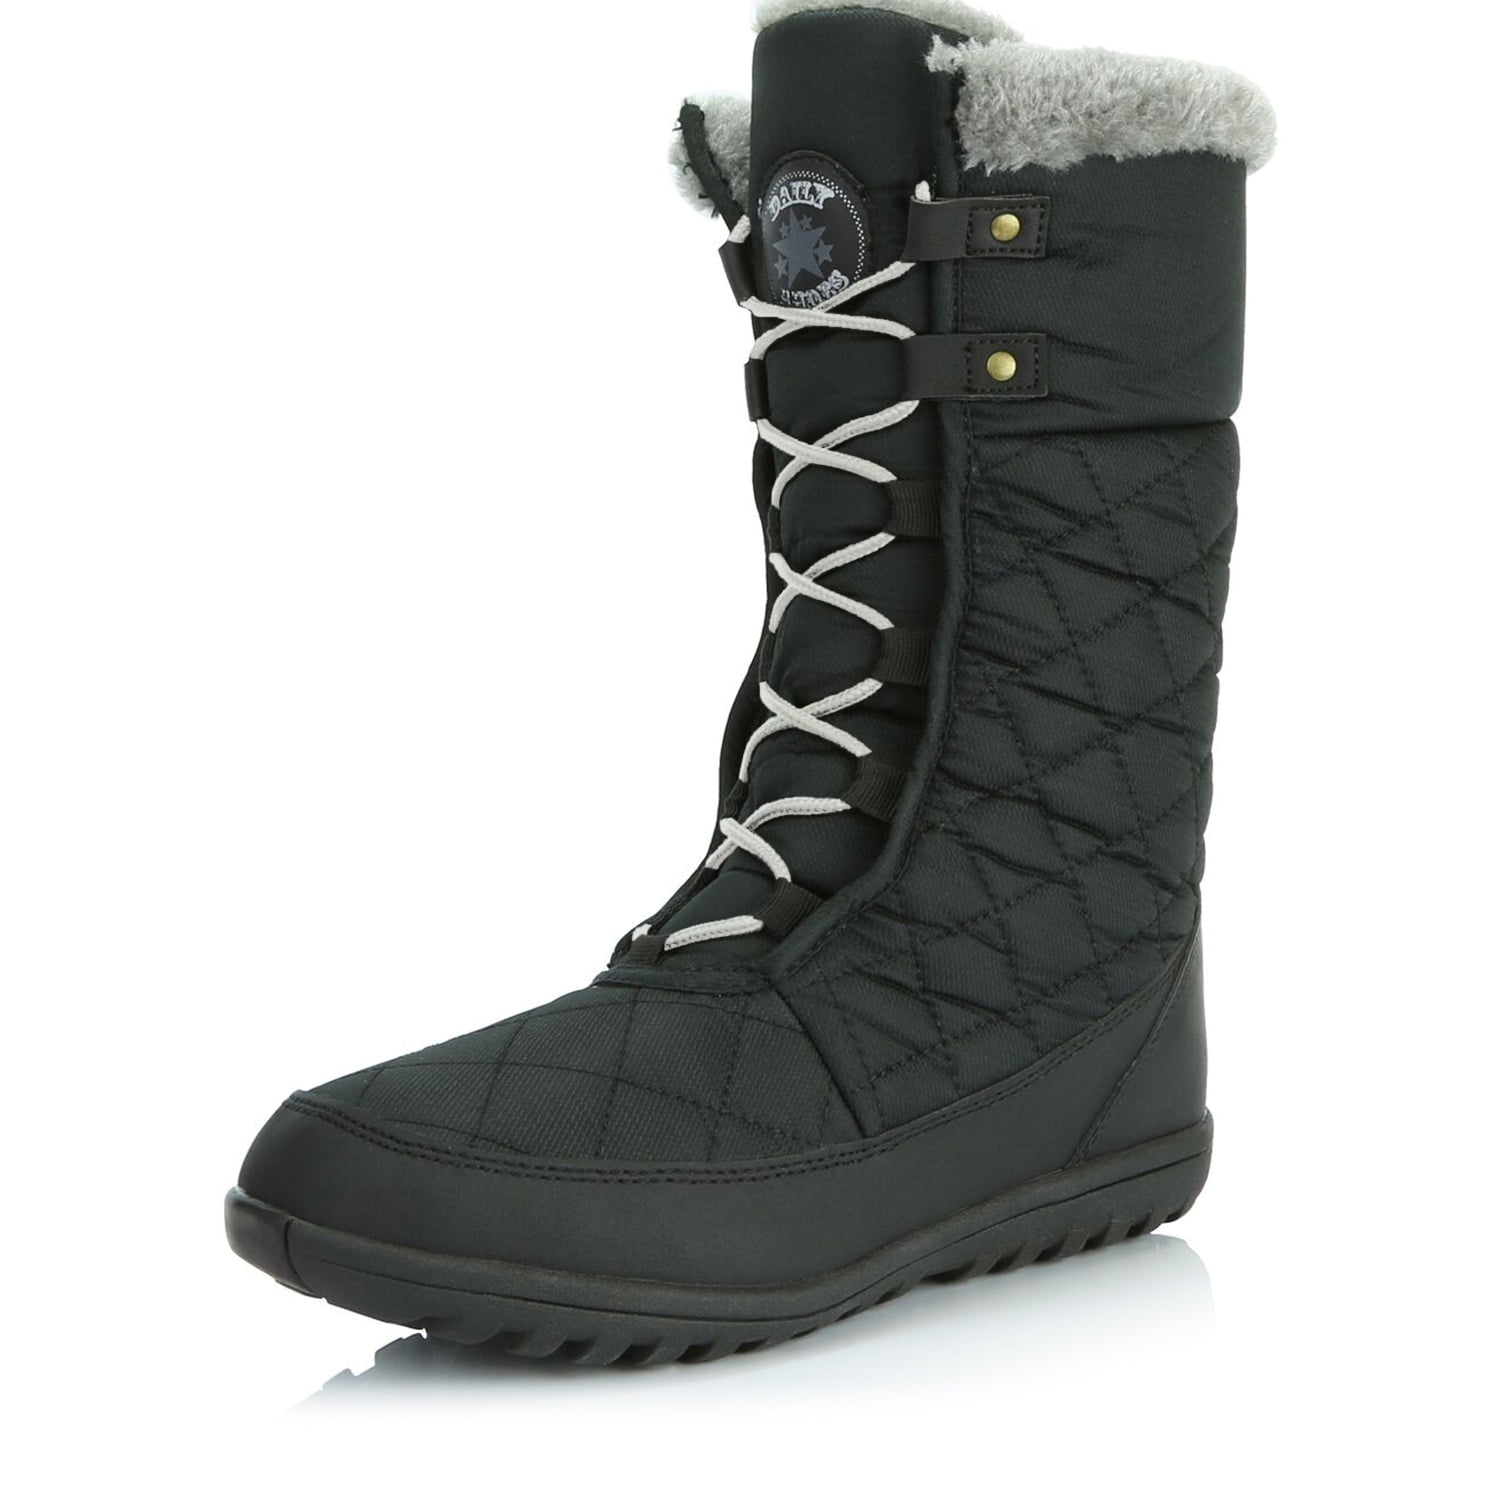 DailyShoes Snow Boots Women Near me 